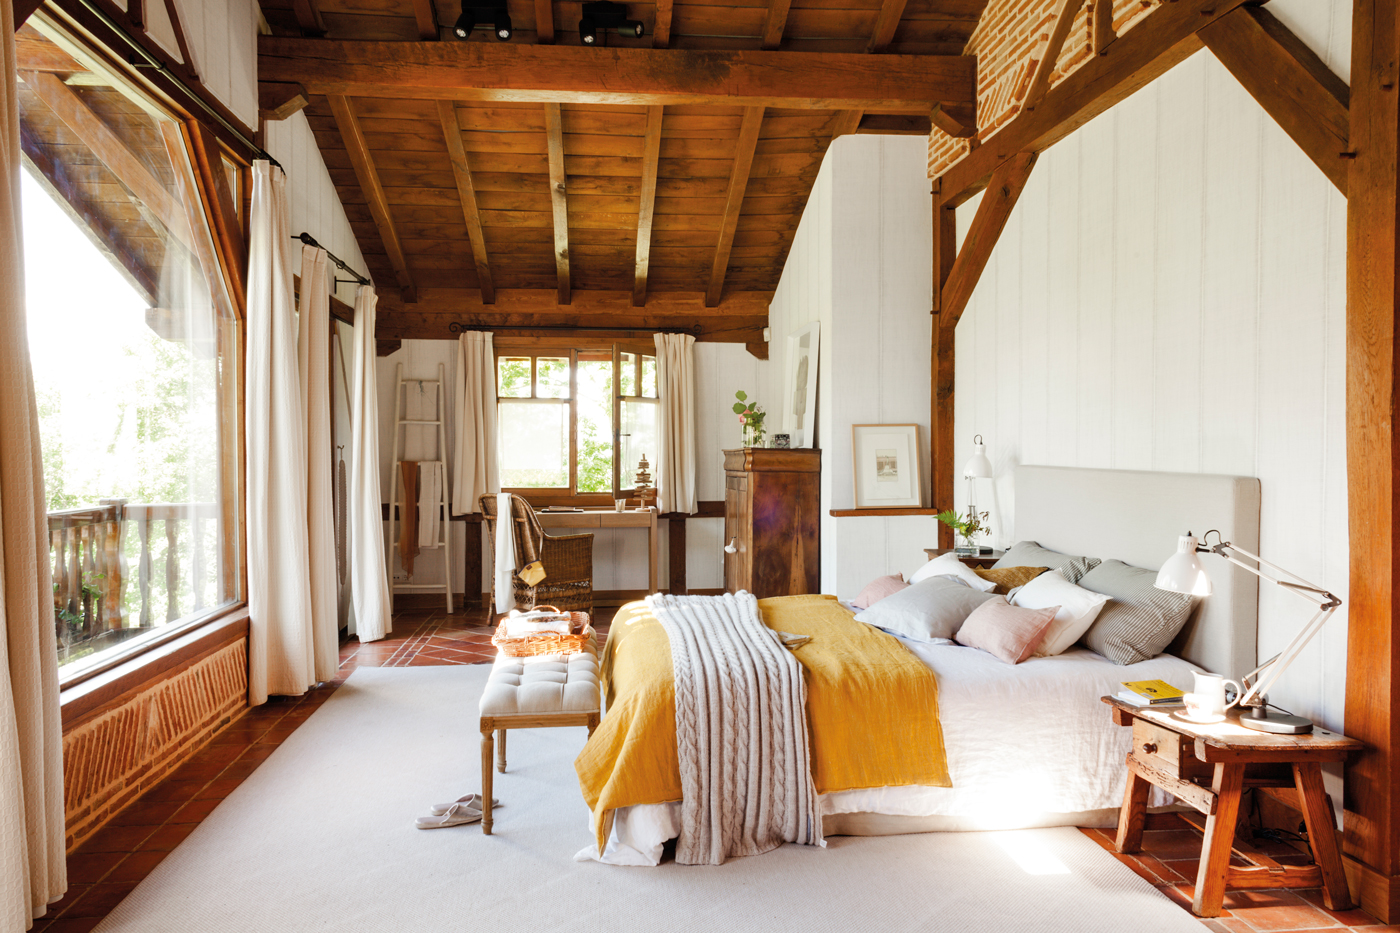 large open bedroom with exposed wood beams and rustic refined style with warm accents